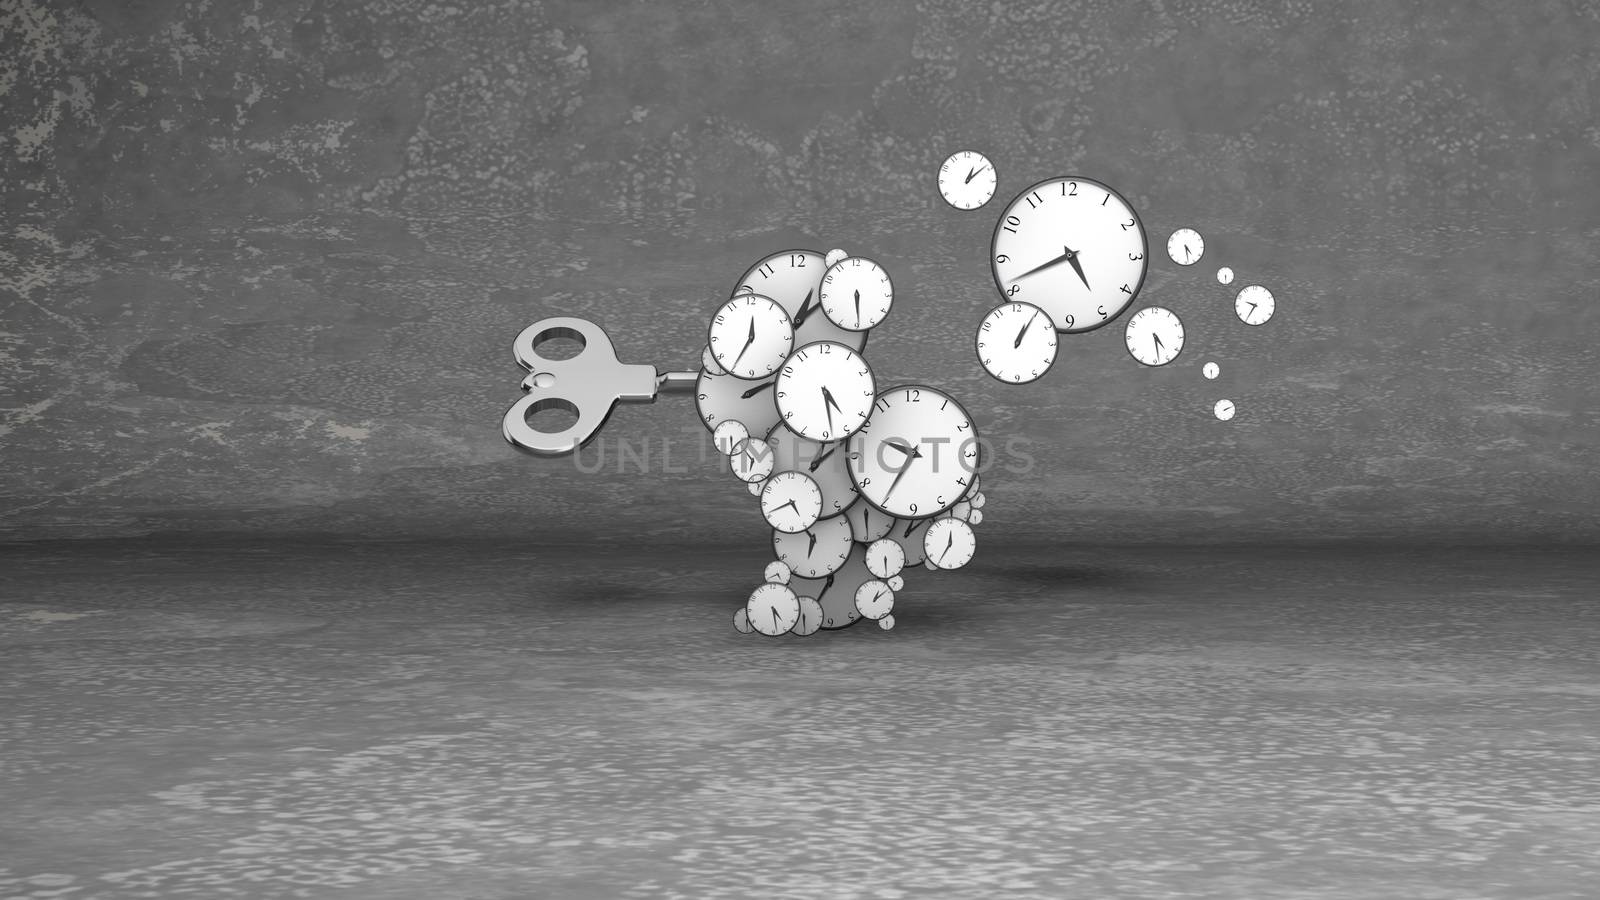 Pop art 3d illustration of blow your mind clock dials of different sizes with revolting hour and minute arrows in the grey backdrop. Several fly nearby.